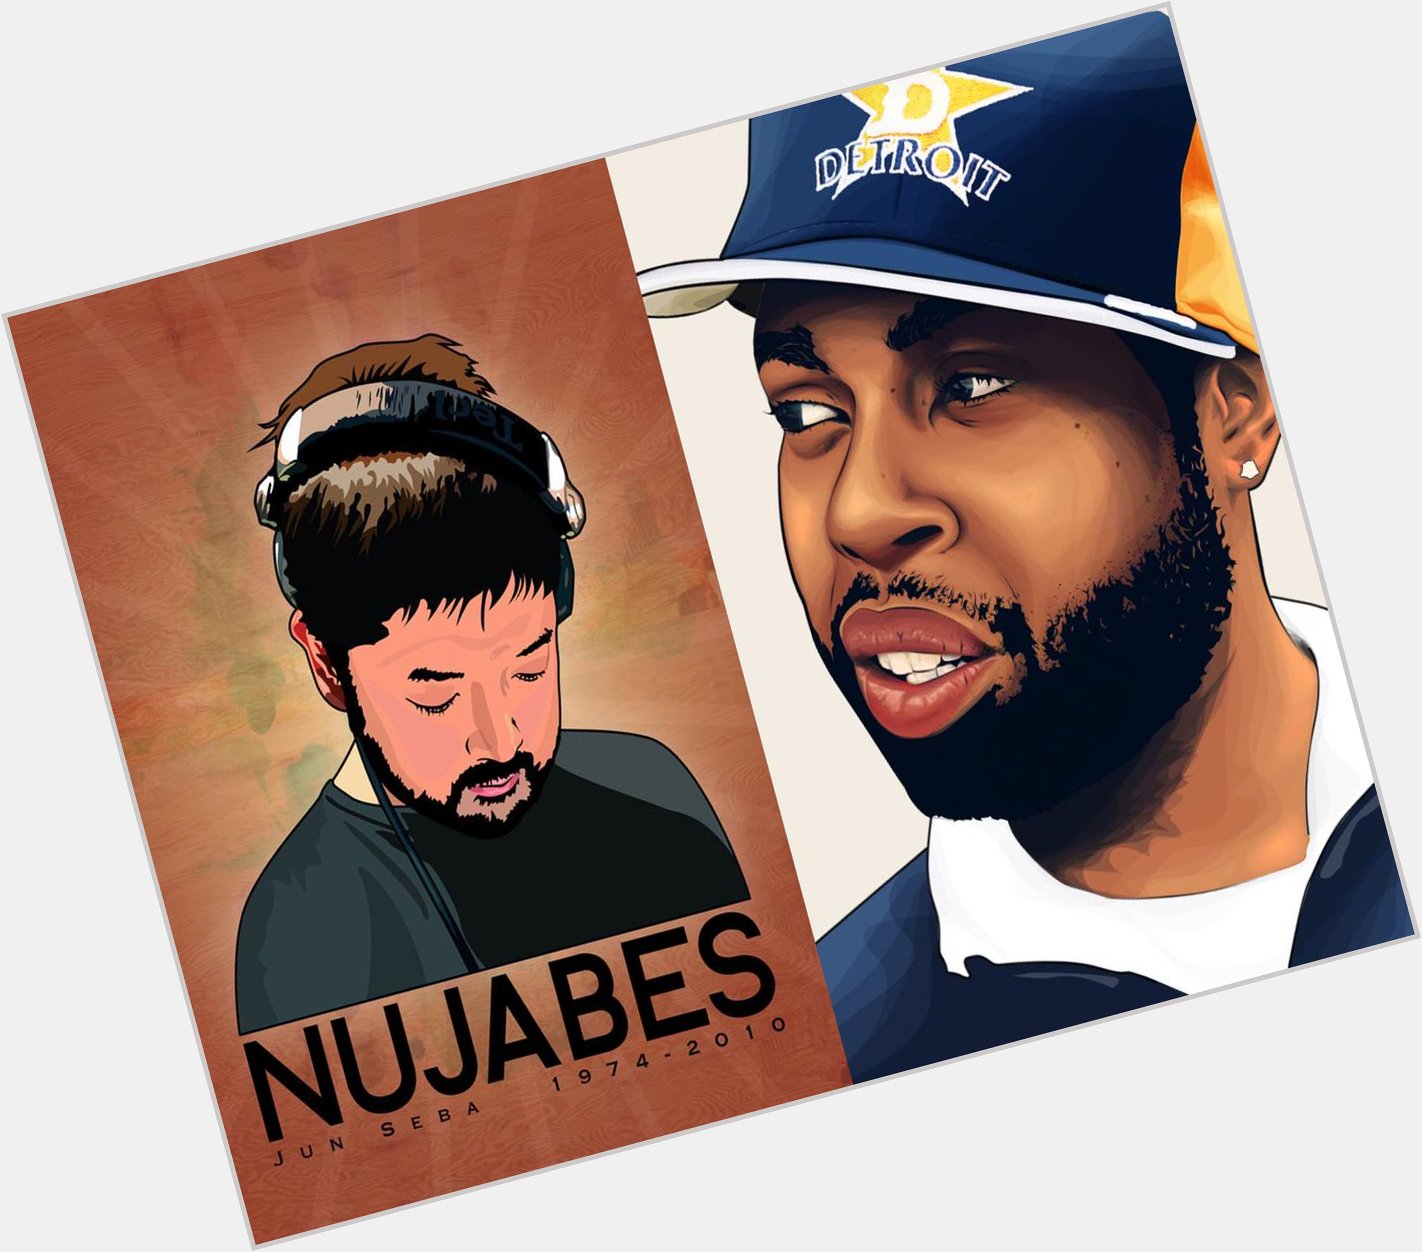 Happy Birthday to two of the dopest hip/hop producers of all time. Rest in beats Nujabes & J Dilla 